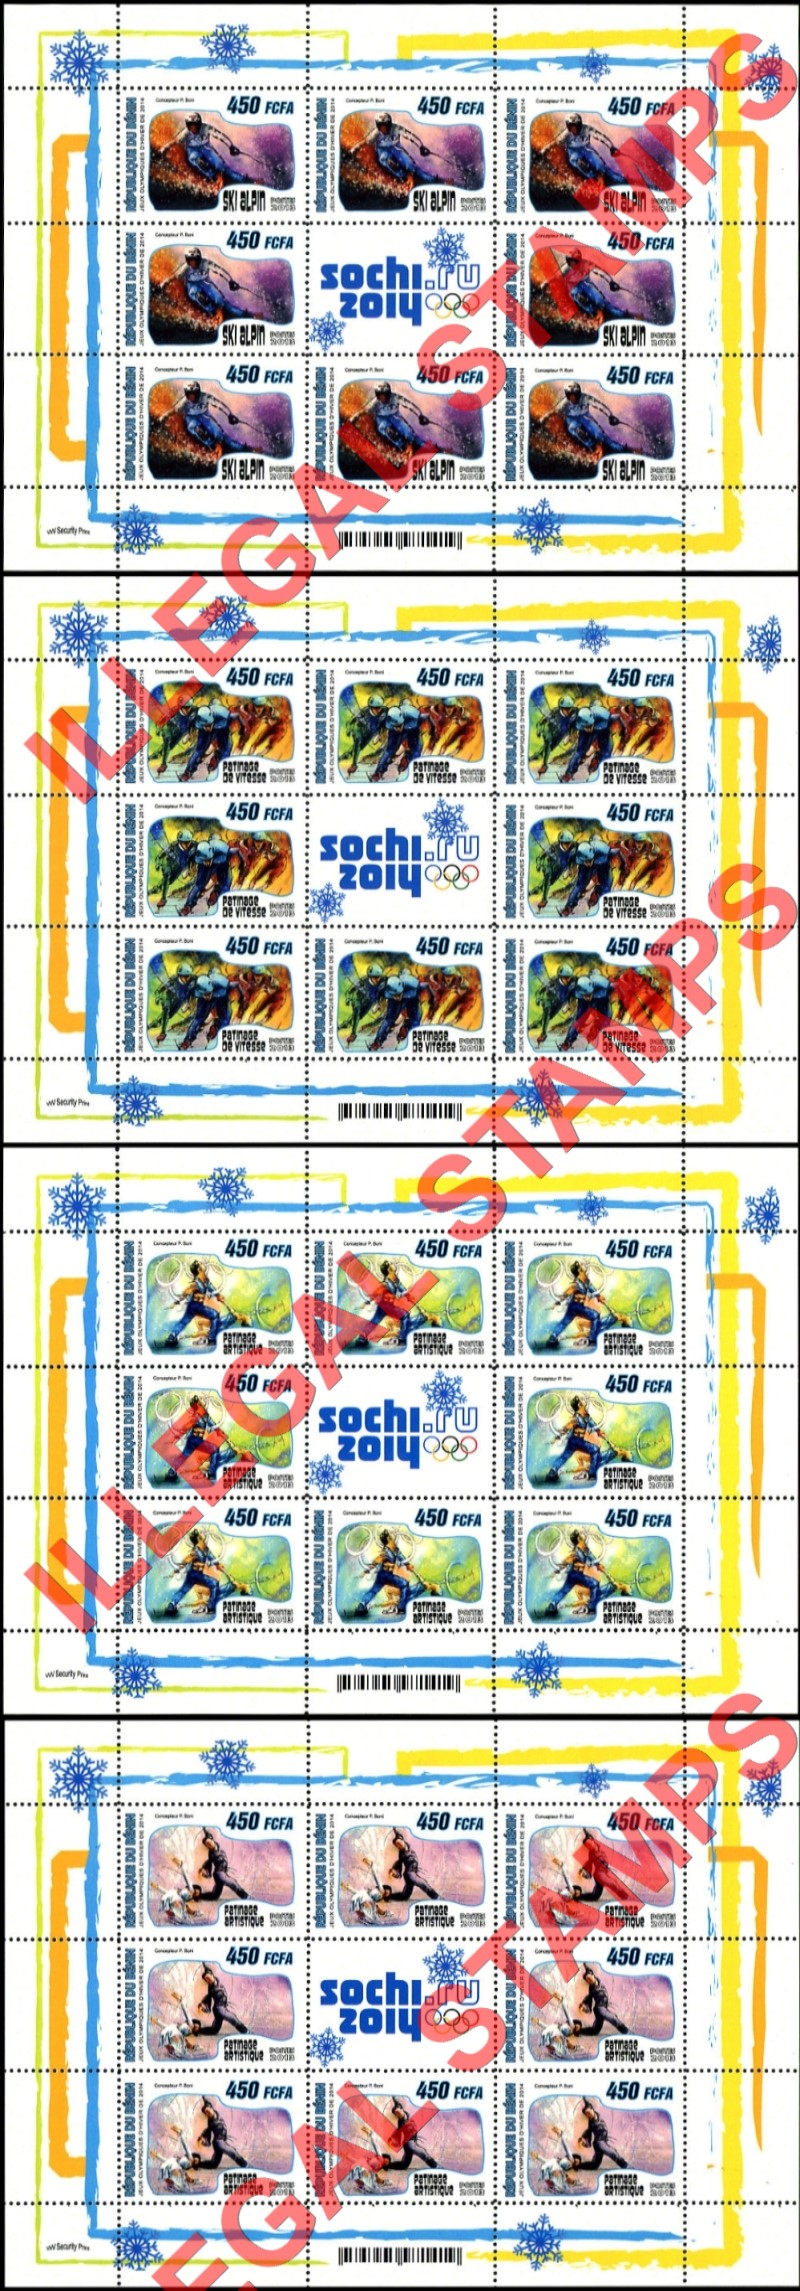 Benin 2013 Winter Olympic Games (2014) Illegal Stamp Sheetlets of 9 (Part 1)